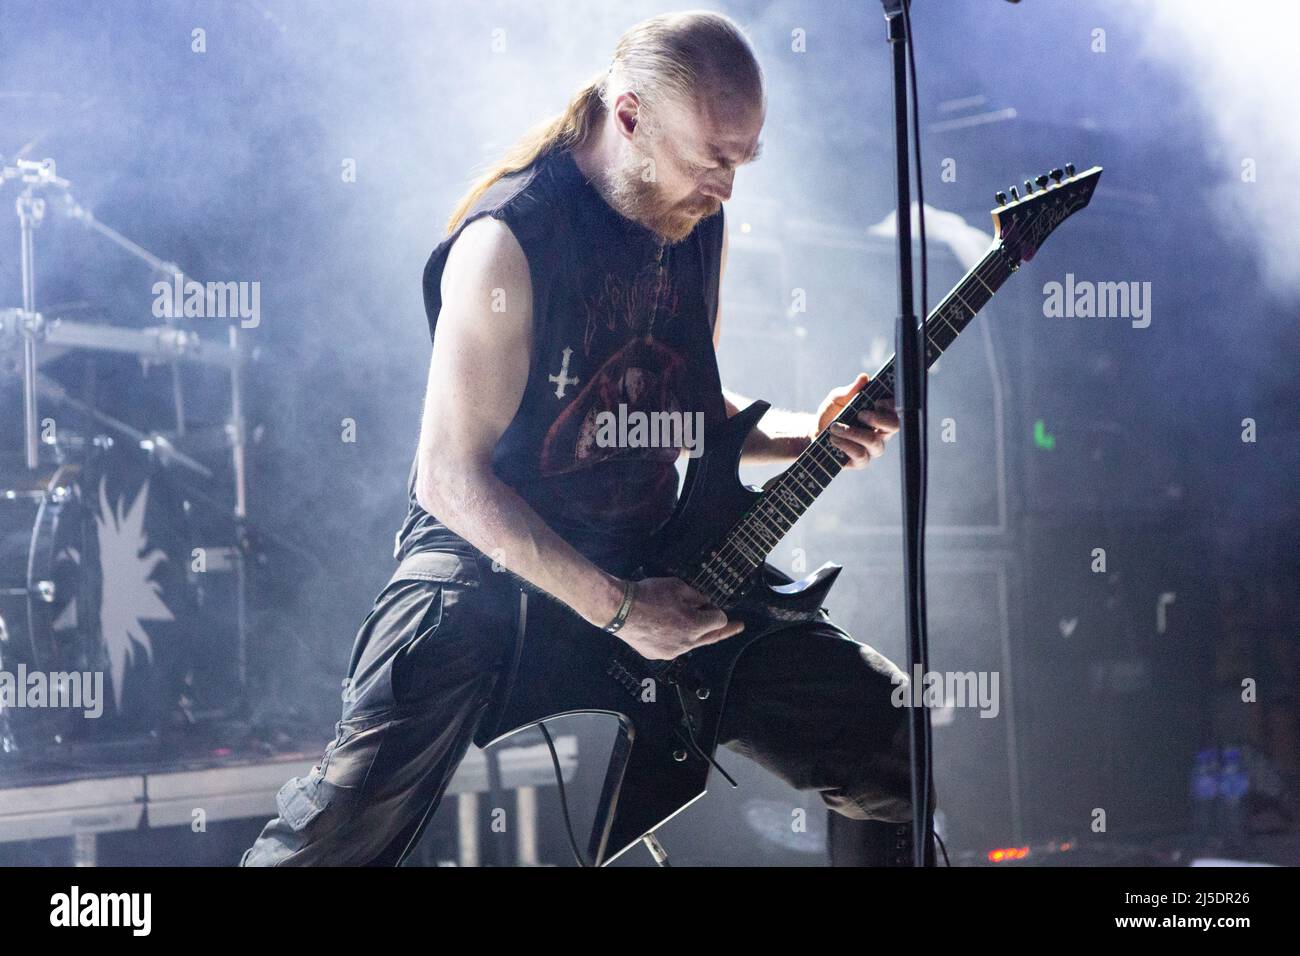 Oslo, Norway. 17th, April 2022. The Norwegian death metal band Myrkskog  performs a live concert at Rockefeller as part of the festival Inferno  Metal Festival 2022 in Oslo. (Photo credit: Gonzales Photo -